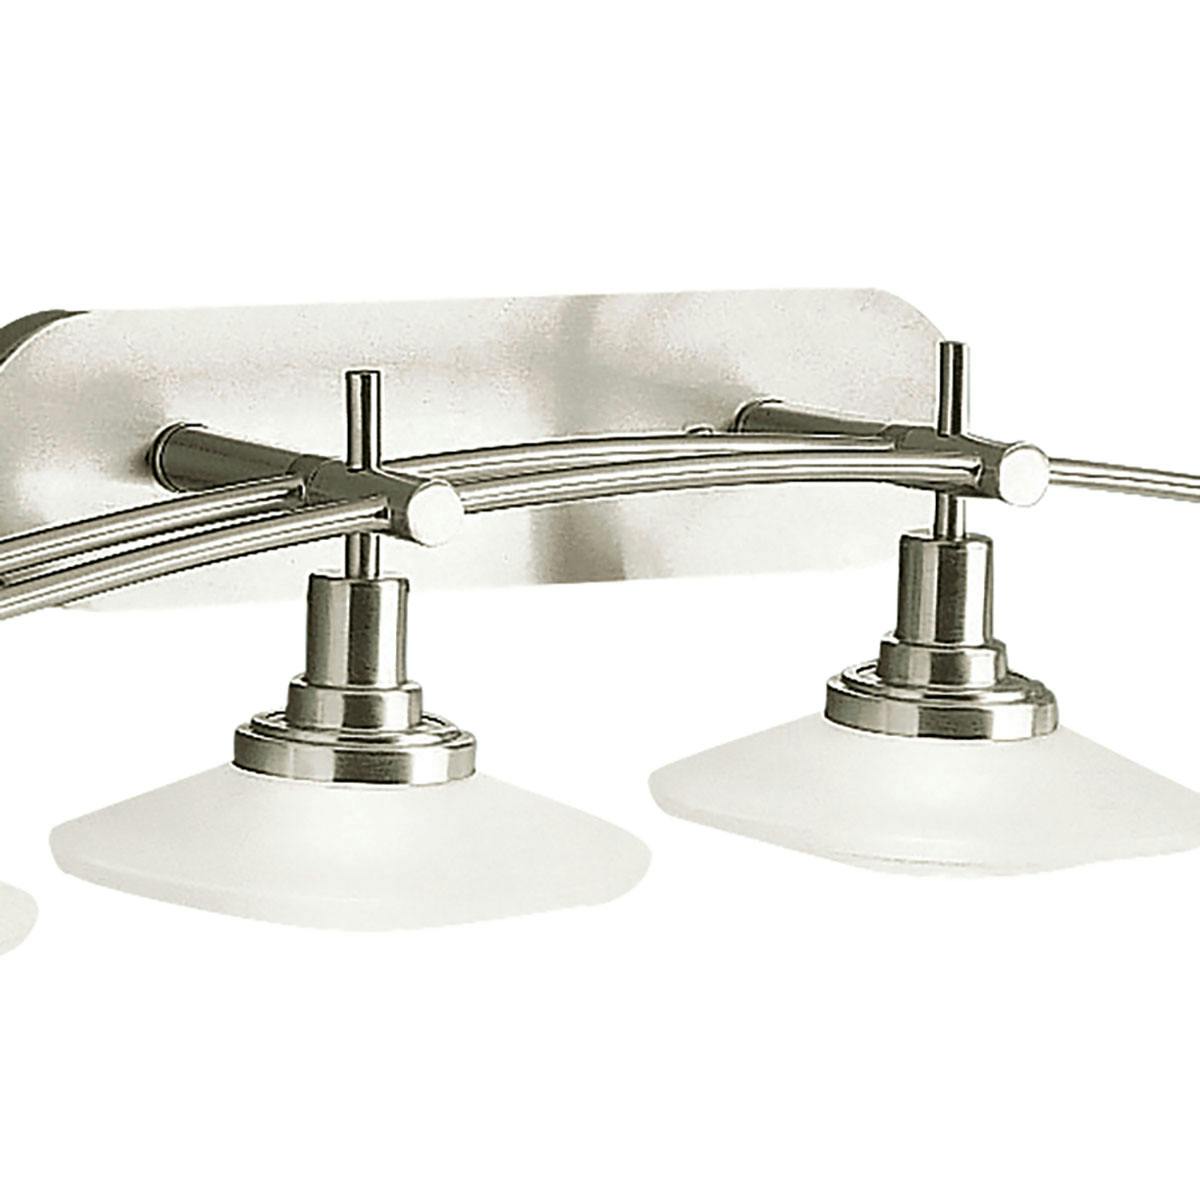 Close up view of the Structures 4 Light Vanity Light Nickel on a white background